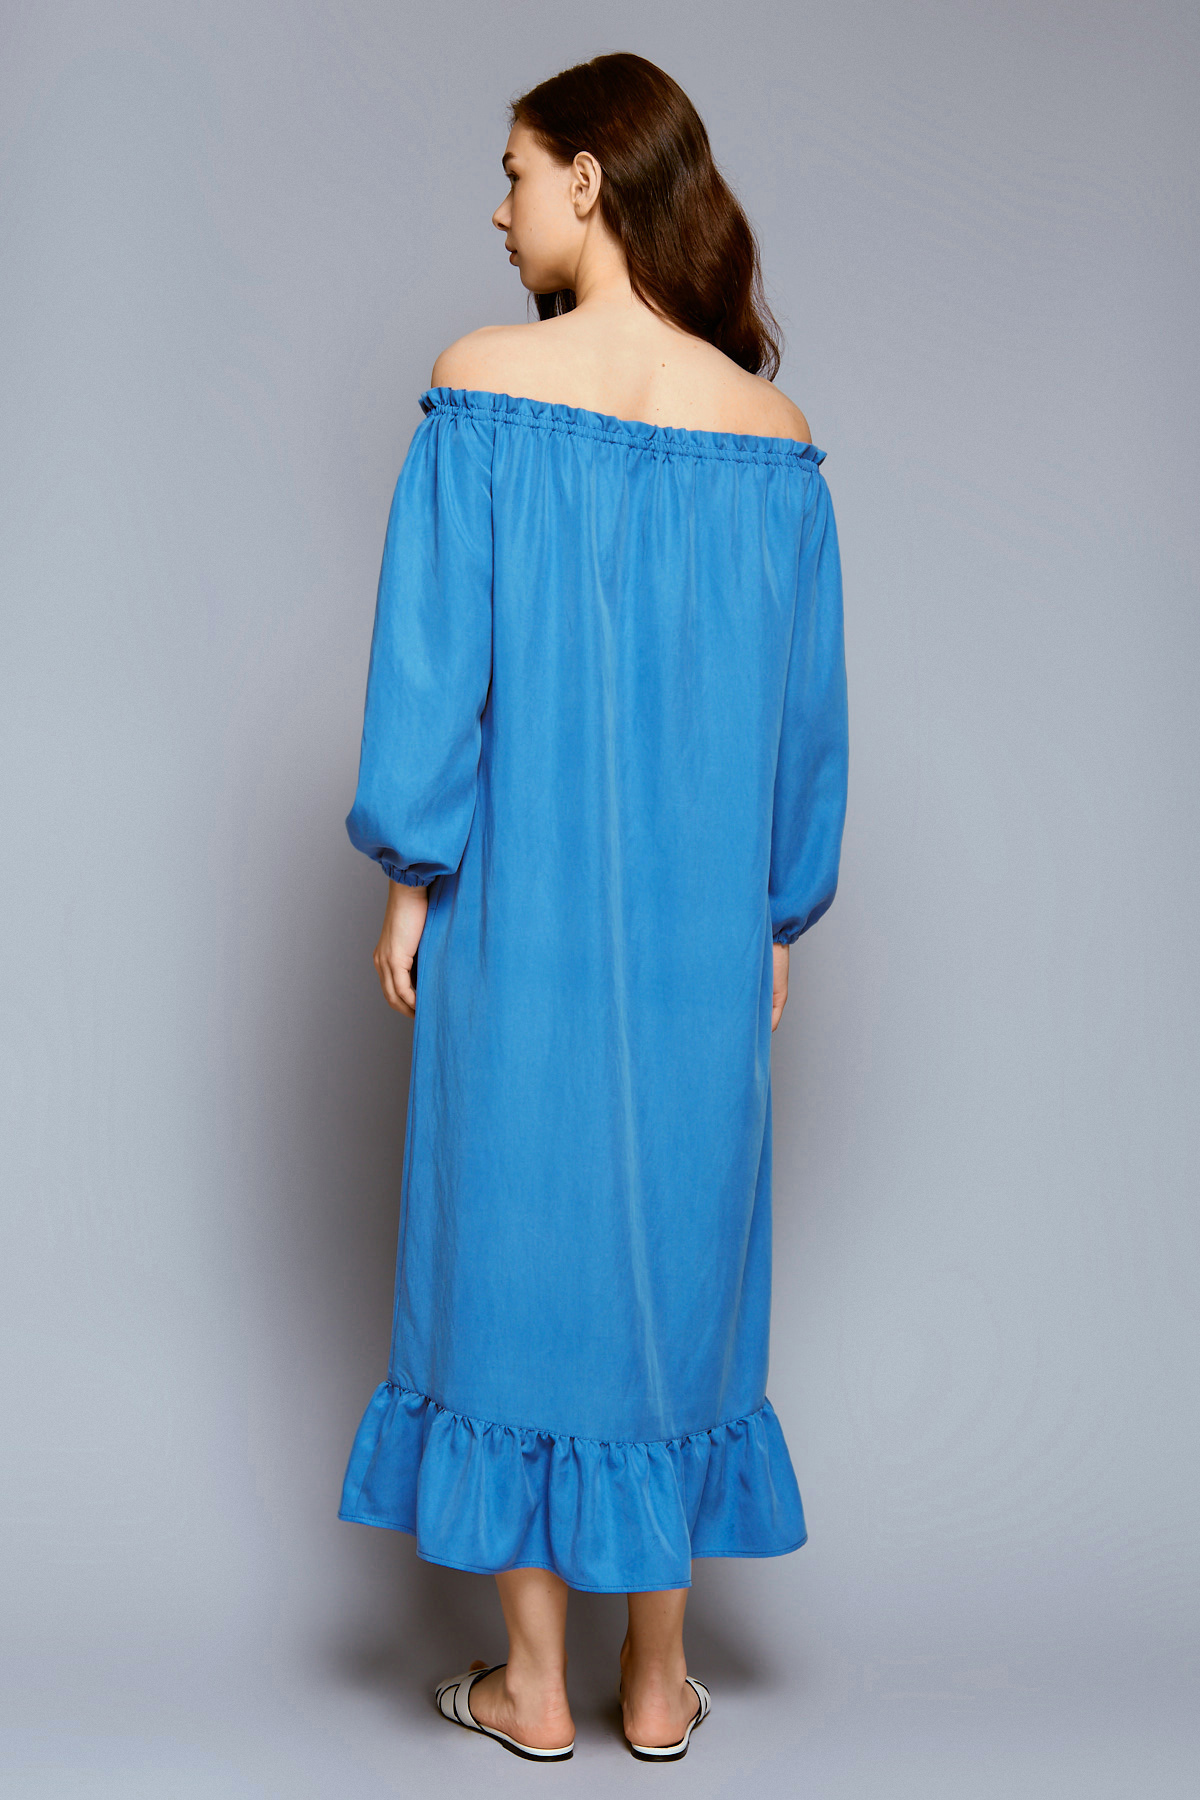 Blue midi dress with buttons elastic neckline and ruffles, photo 4